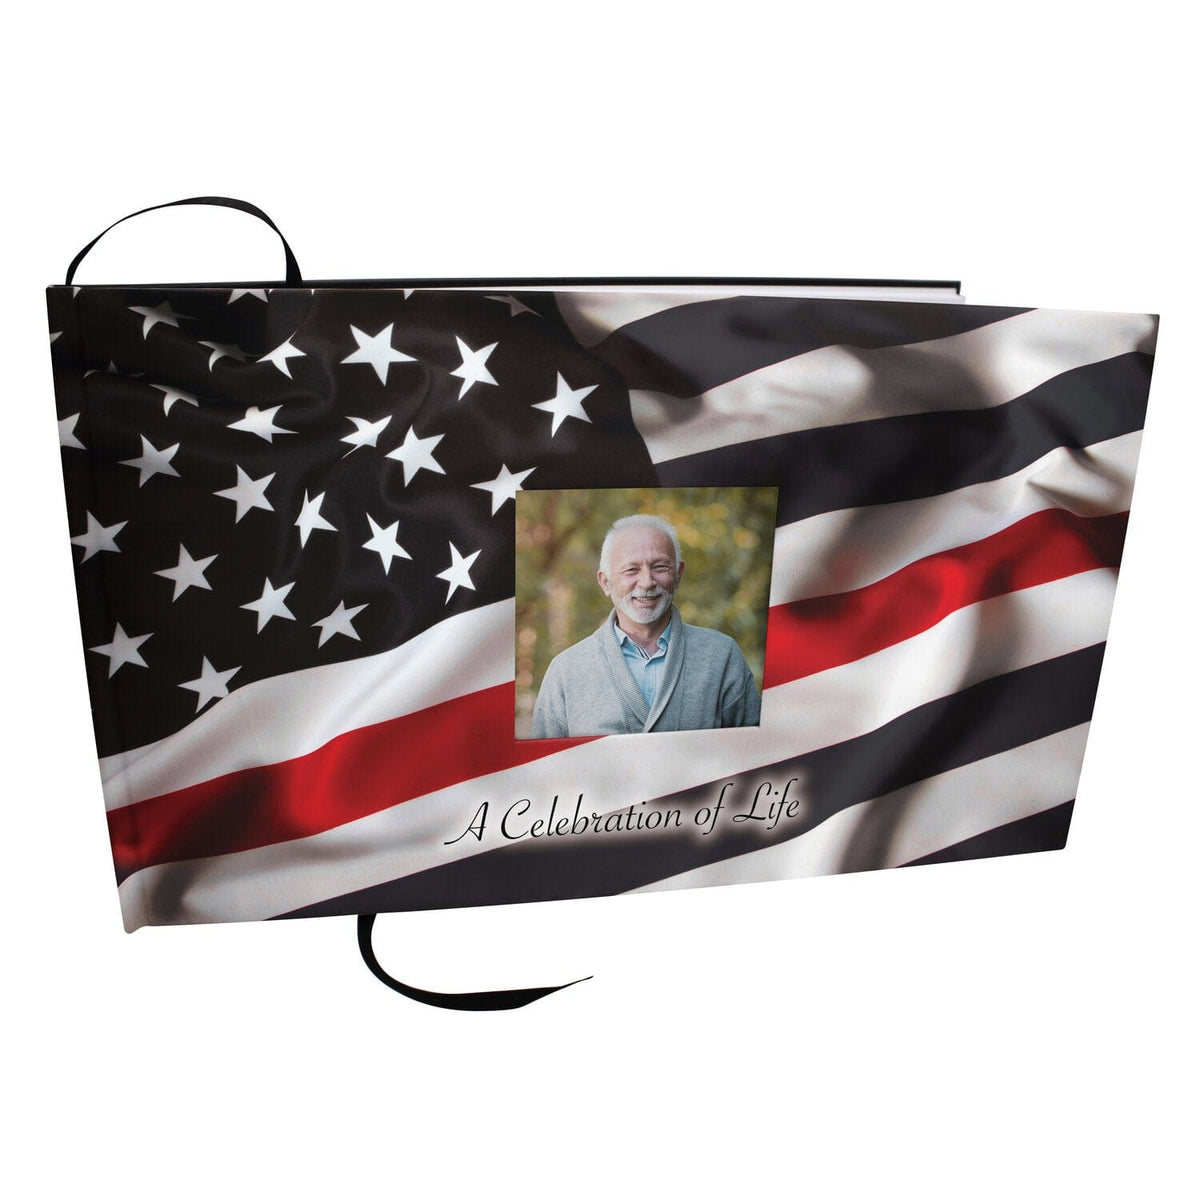 Commemorative Cremation Urns Red Line Flag Firefighter Matching Themed &#39;Celebration of Life&#39; Guest Book for Funeral or Memorial Service